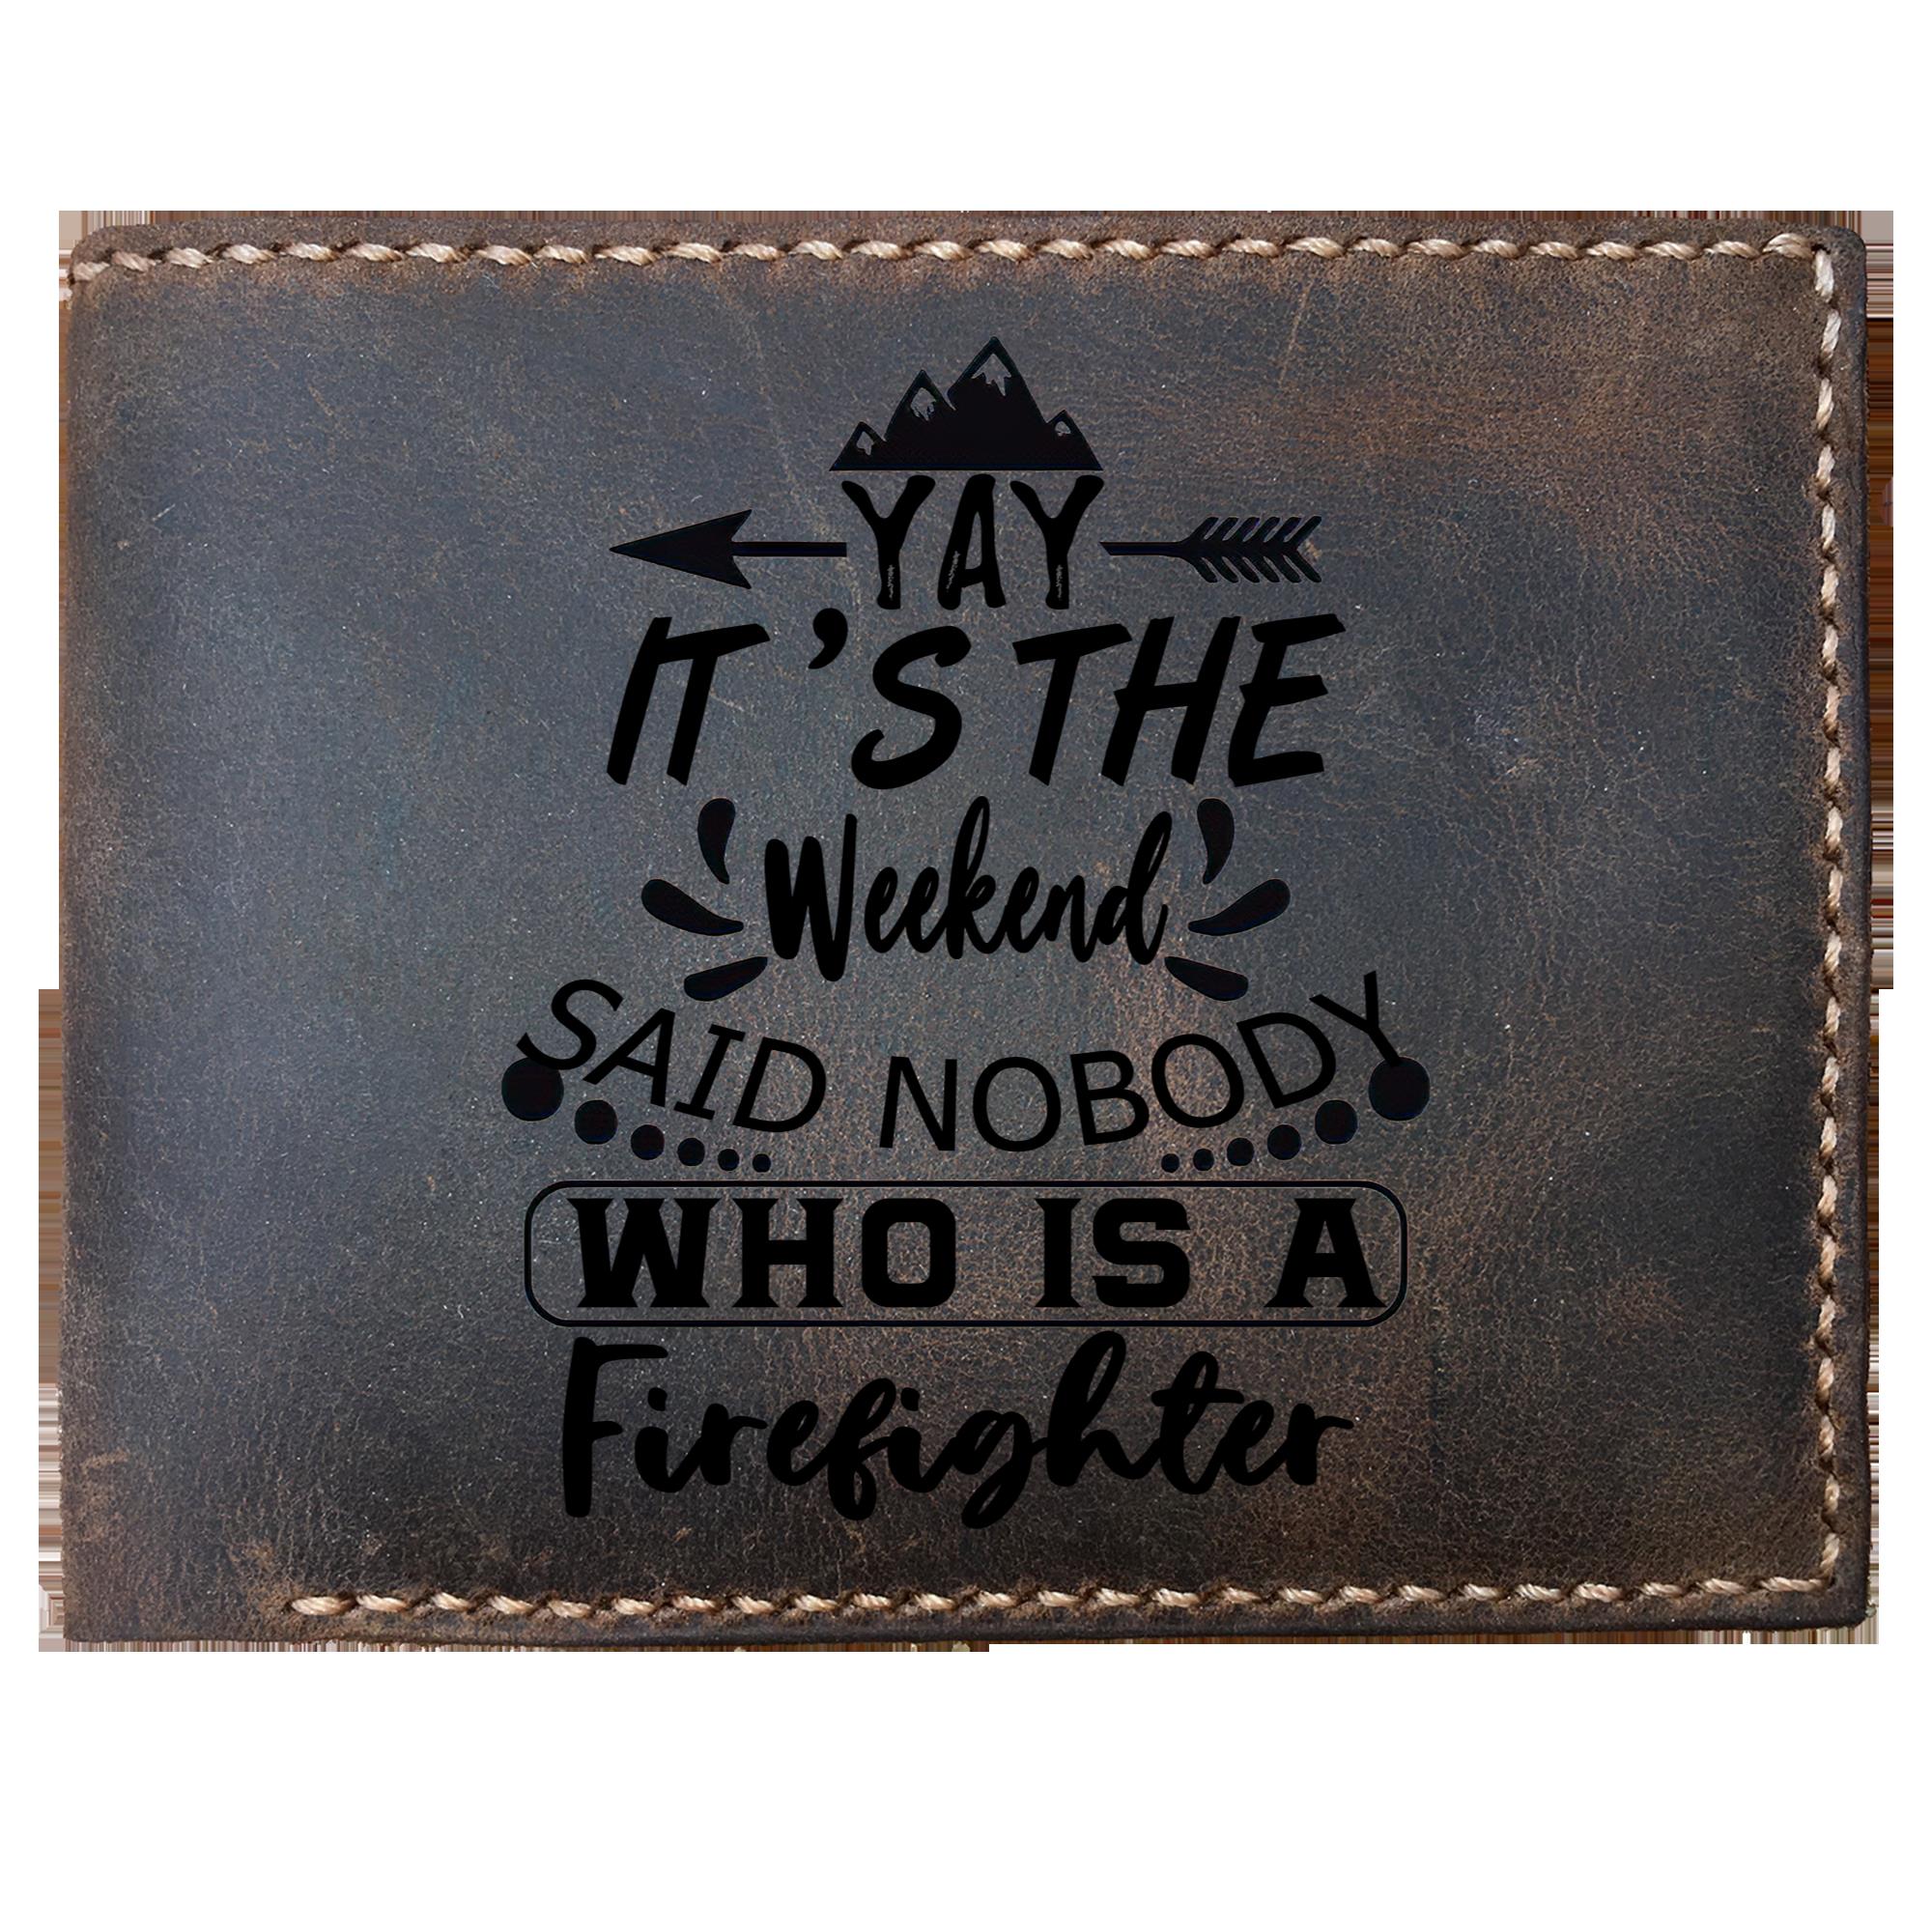 Skitongifts Funny Custom Laser Engraved Bifold Leather Wallet For Men, It's The Weekend Said Nobody Who Is A Firefighter, Father's Day Gifts